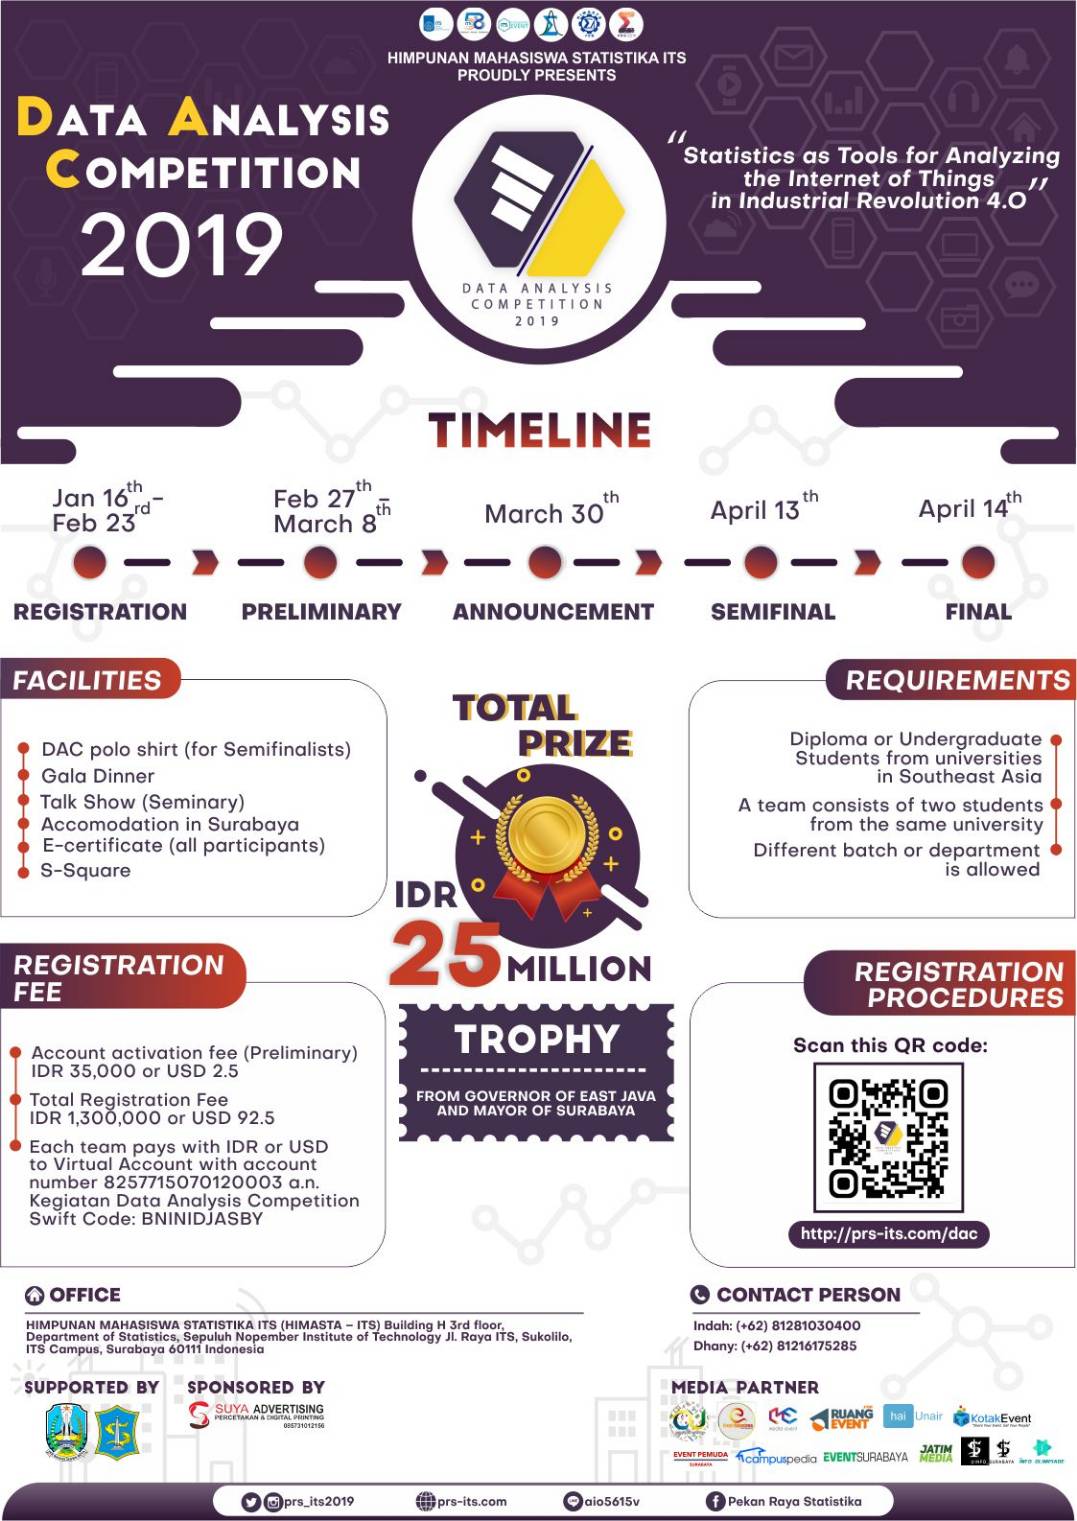 DATA ANALYSIS COMPETITION (DAC) 2019